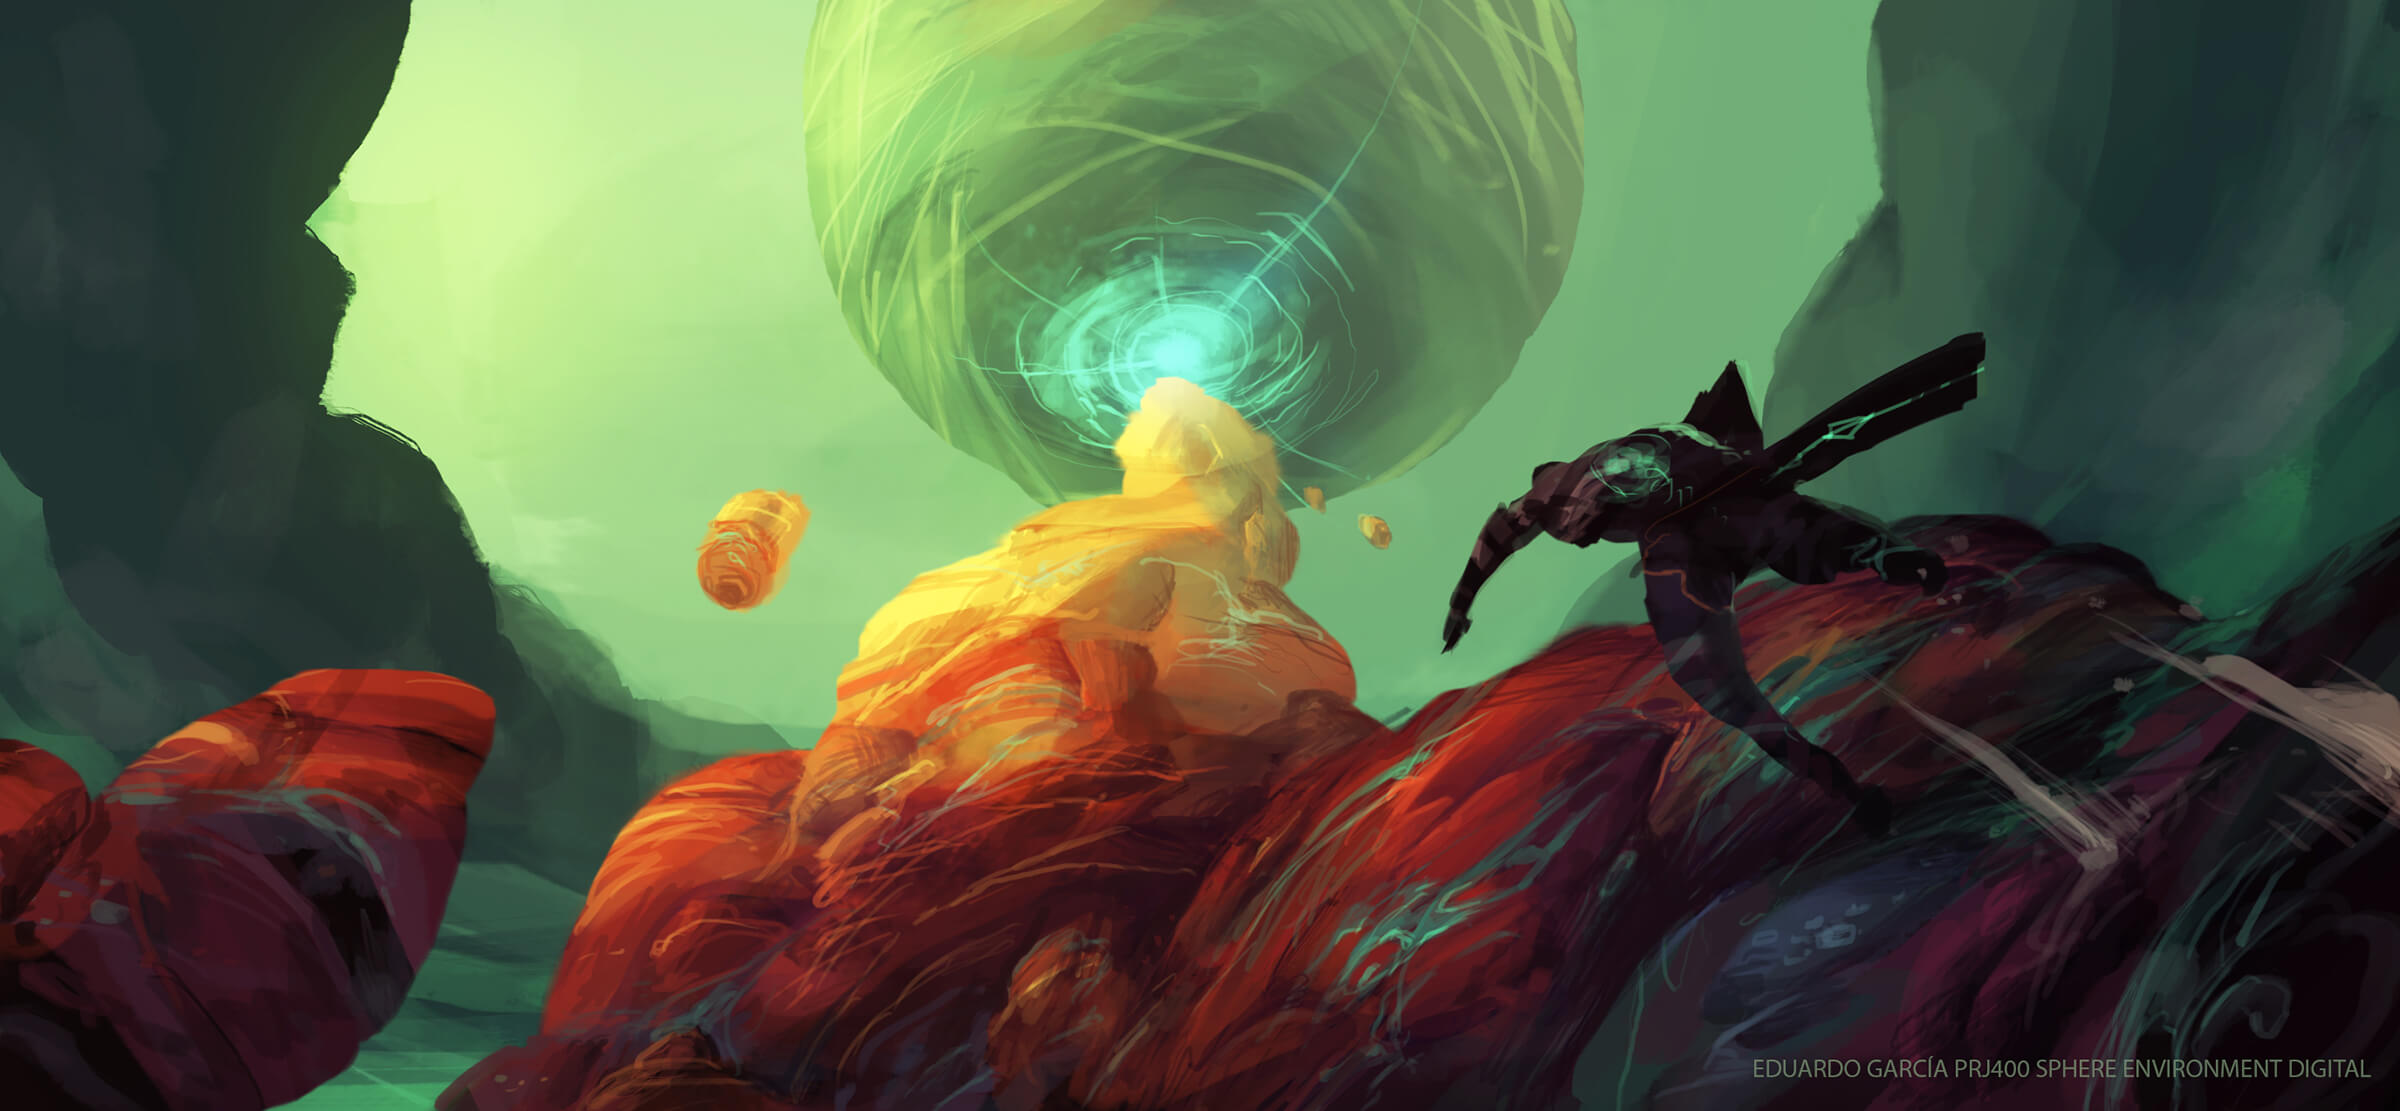 A figure runs up a multicolored stone outcropping toward a stony sphere hanging precariously against a hazy green alien sky.